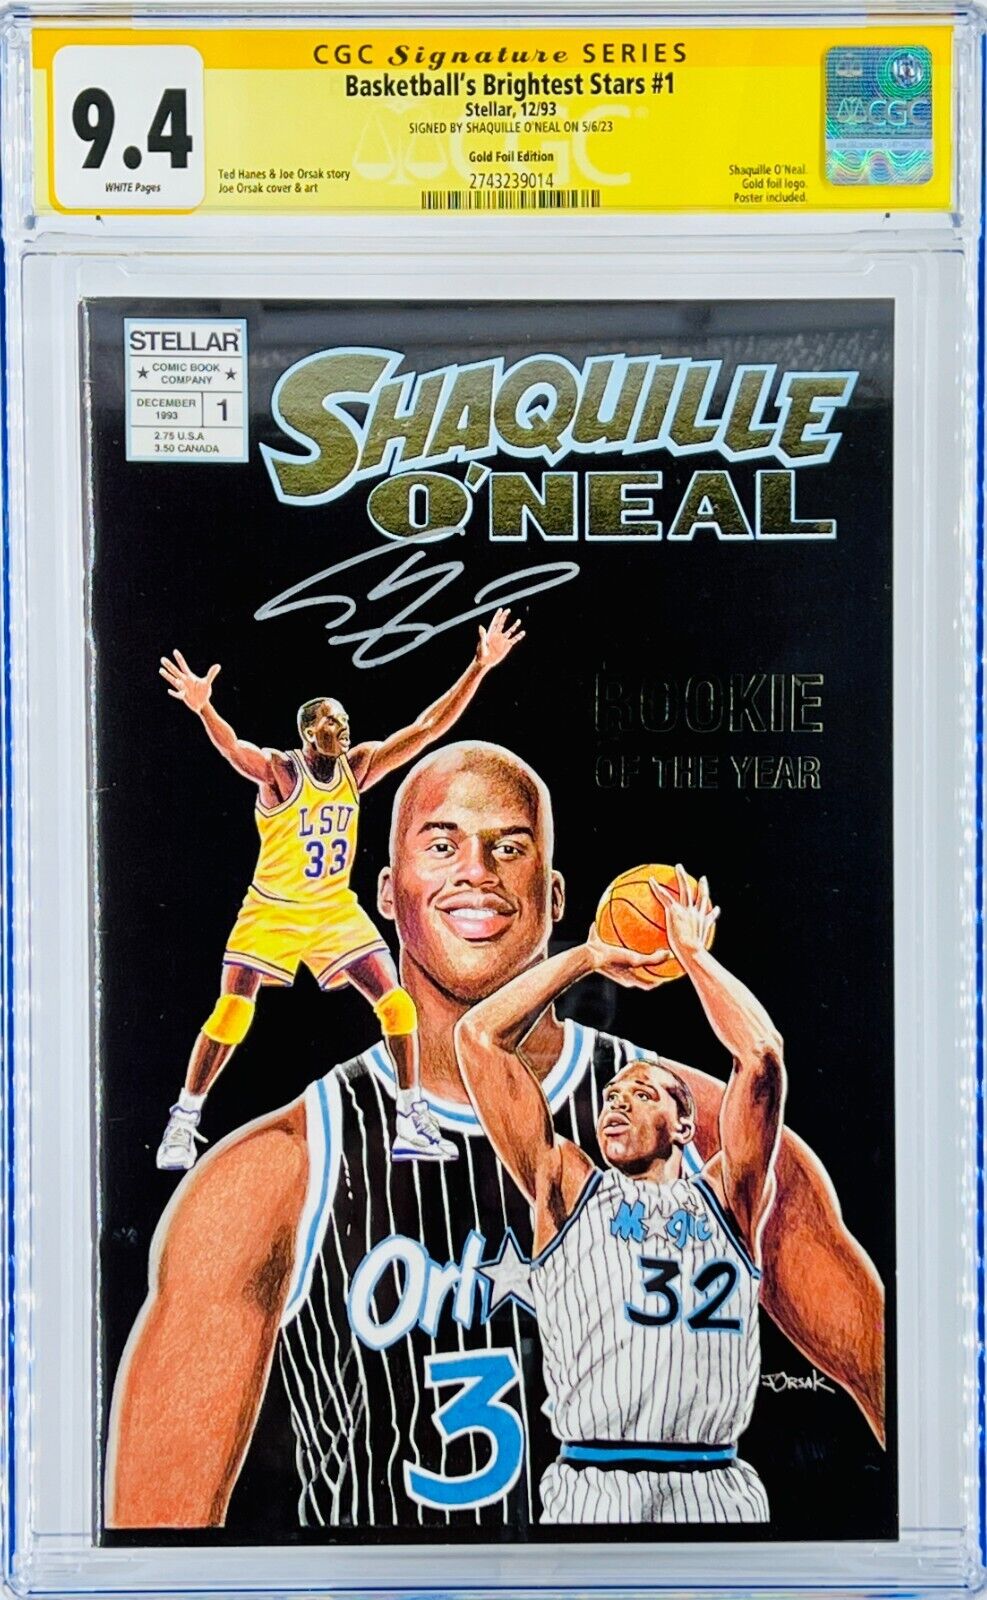 Shaquille O'Neal Signed CGC SS Basketball's Brightest Stars #1 Graded 9.4